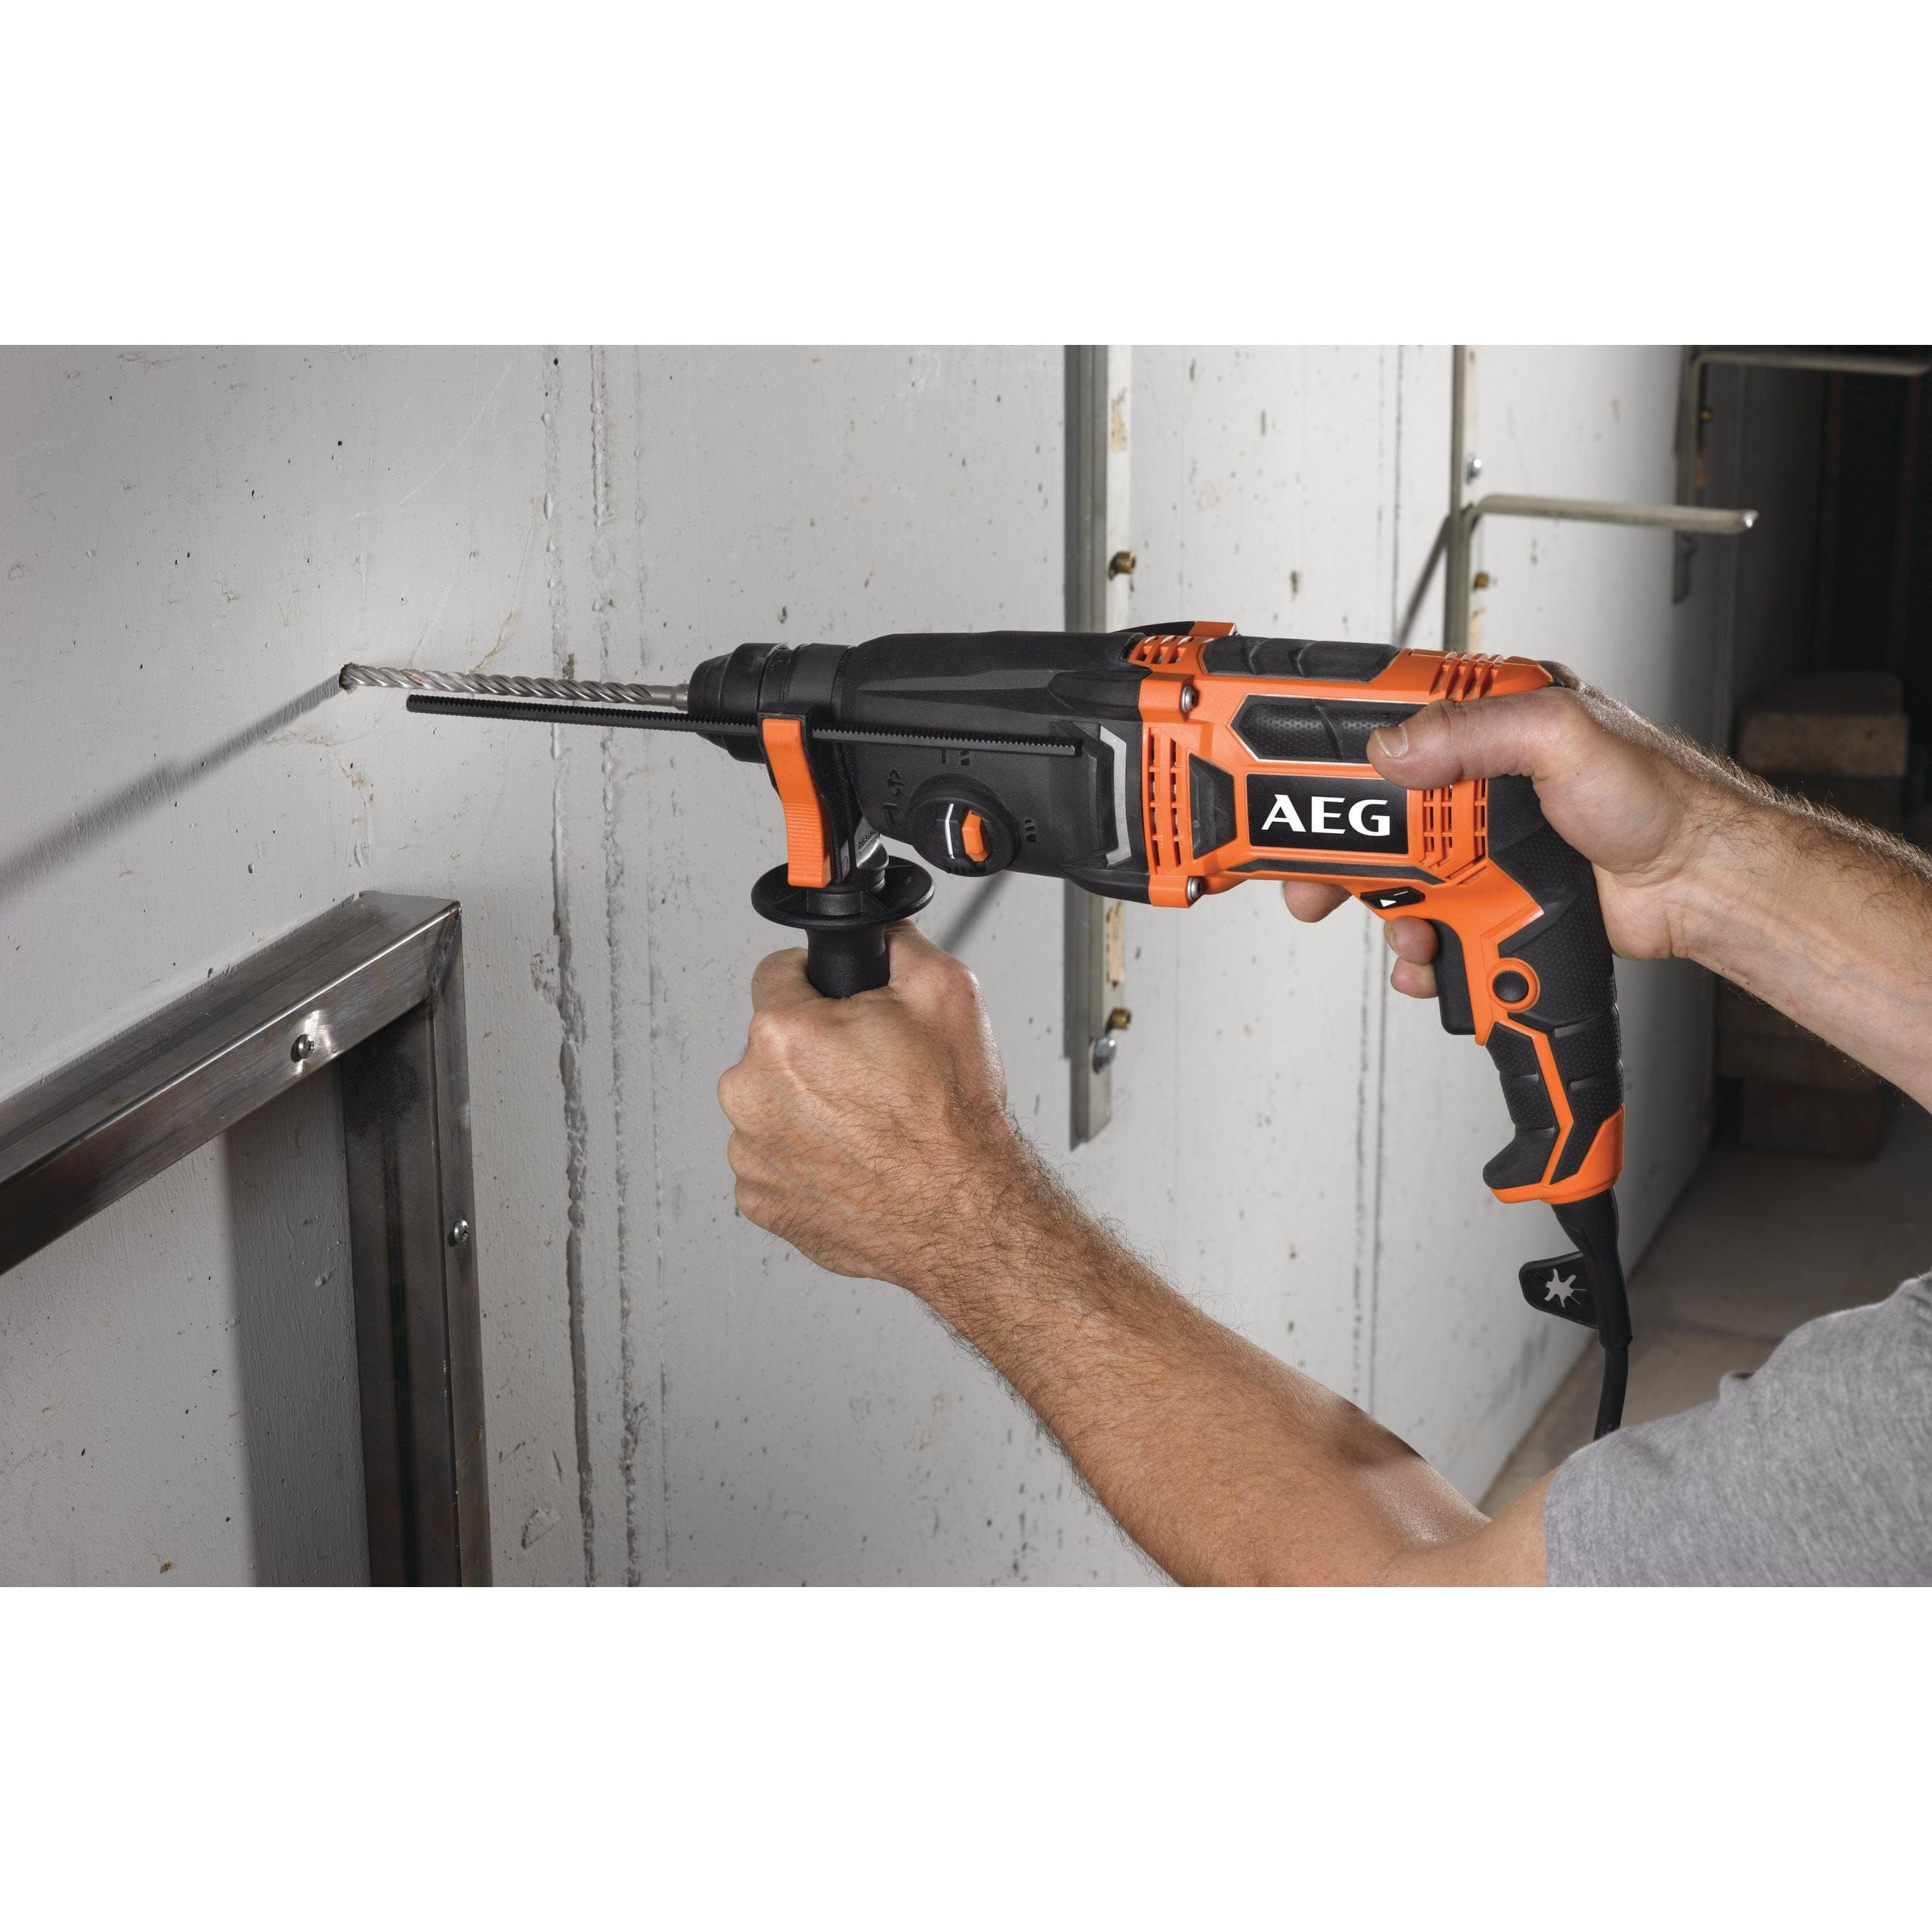 AEG SDS-Plus Combi Hammer 3-Mode Drill 26mm 800W - KH24IE | Supply Master Accra, Ghana Drill Buy Tools hardware Building materials